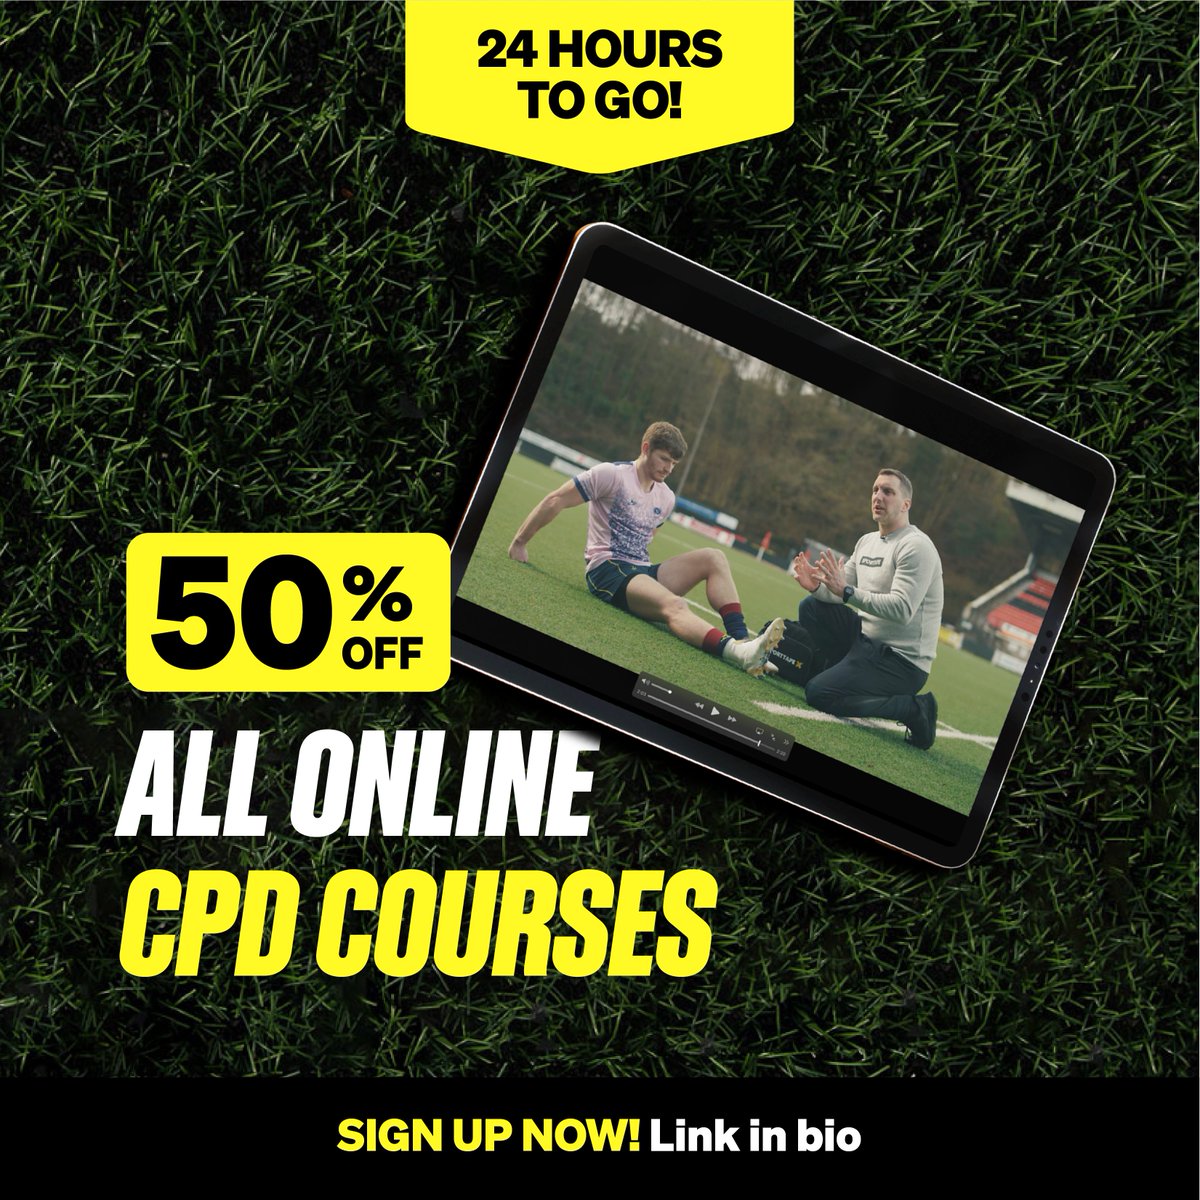 🚨24 HOURS TO GO!🚨 ⏰There's just 24hrs left on our February offer! Grab 50% off ALL online CPD courses🔥 Take your taping to the next level! 🚀 Sign Up Now! 🔗 Link in Bio. #sporttape #taping #CPD #learn #sportstherapy